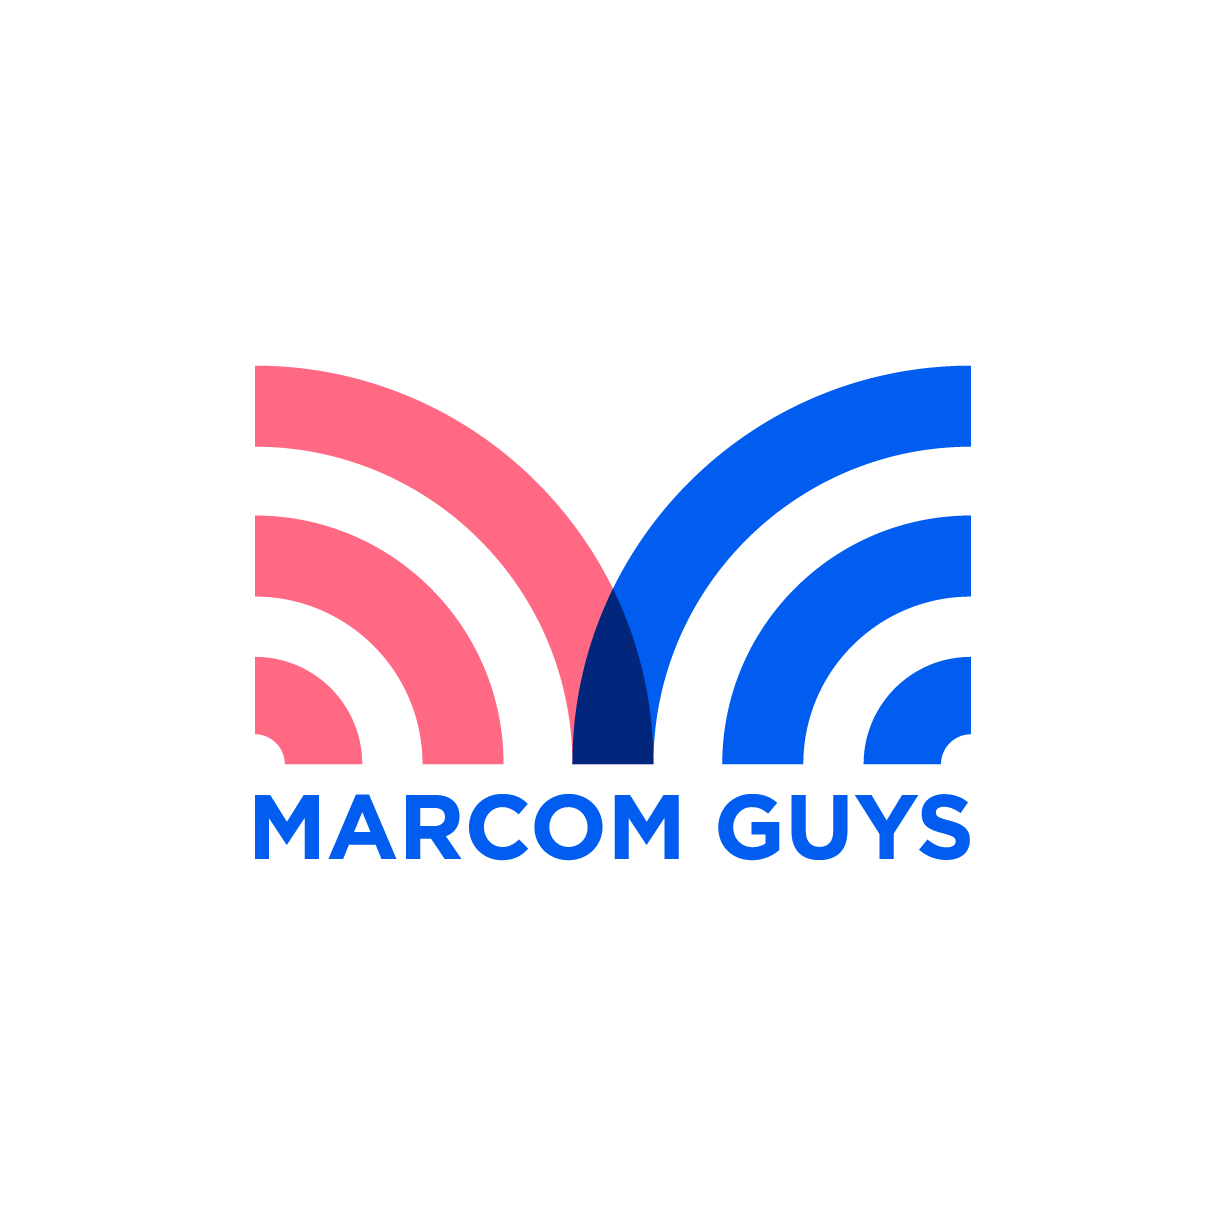 MarCom Guys profile on Qualified.One